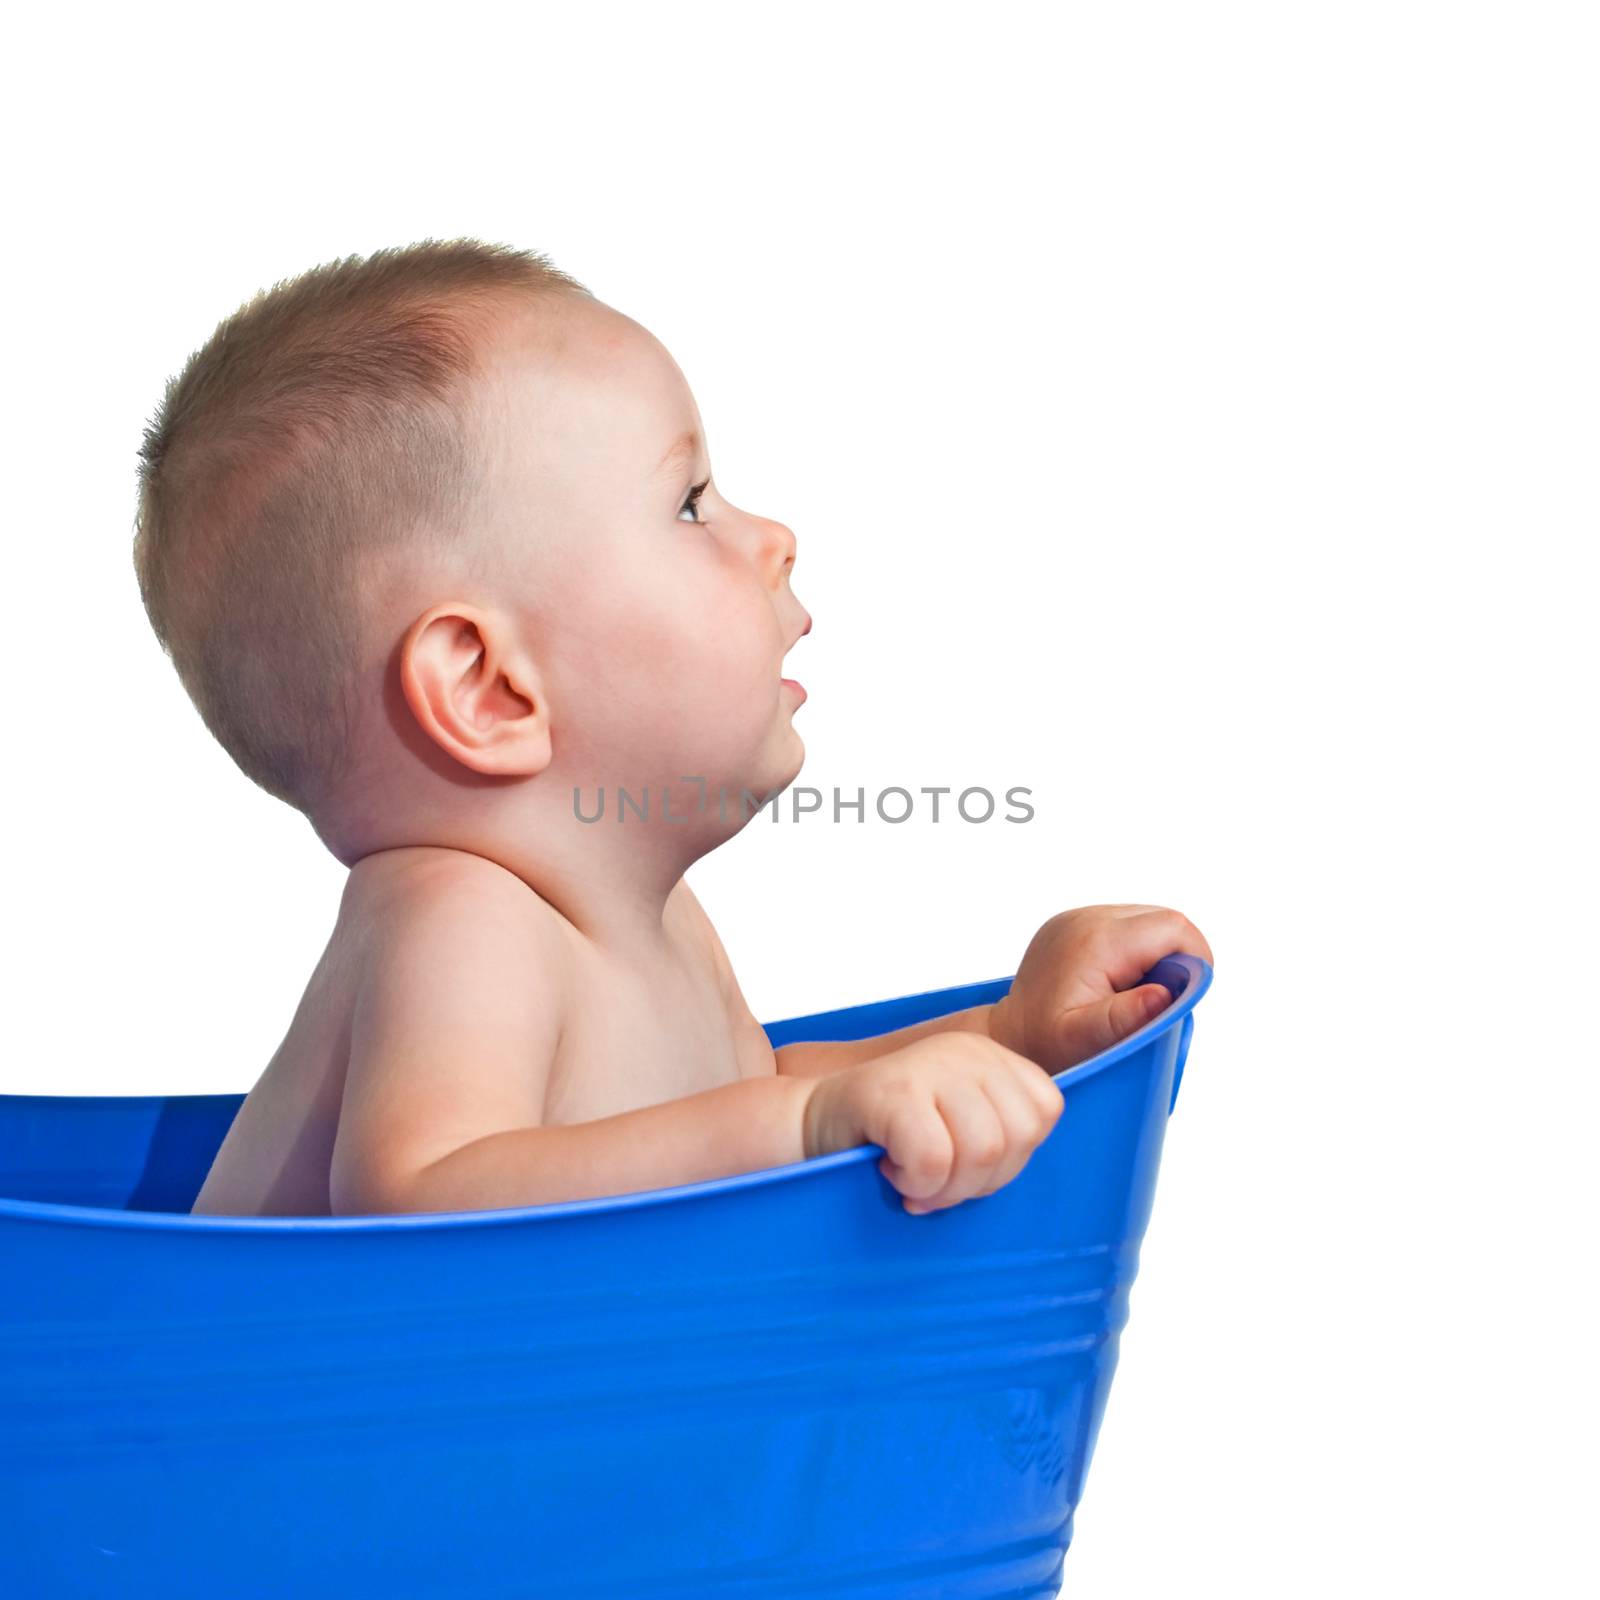 Cute baby in plastic tub looking to the front. Isolated on a white background.